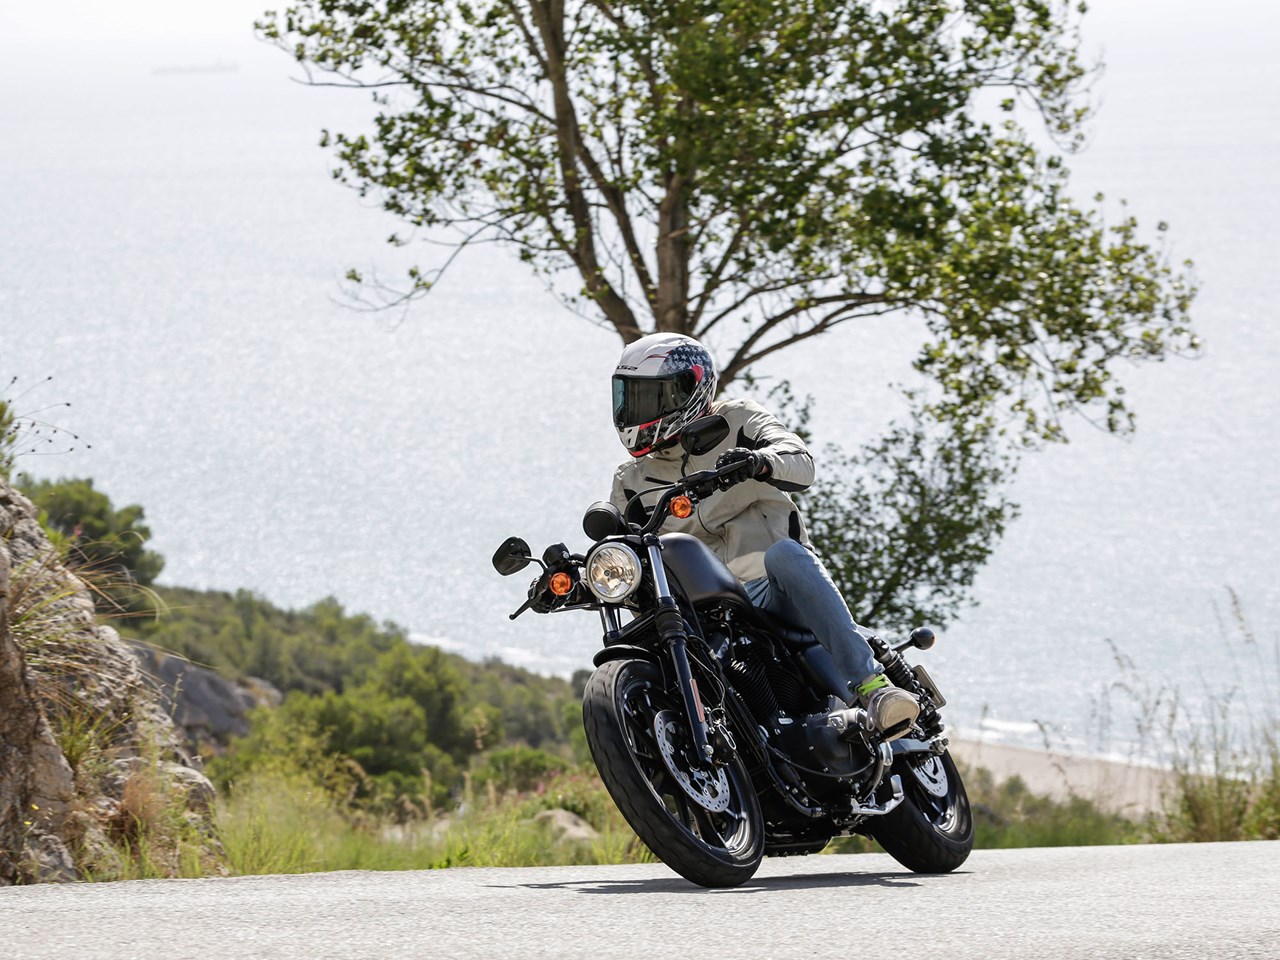 Harley Davidson Sportster Iron 883 Review - Pros, Cons, Specs & Ratings